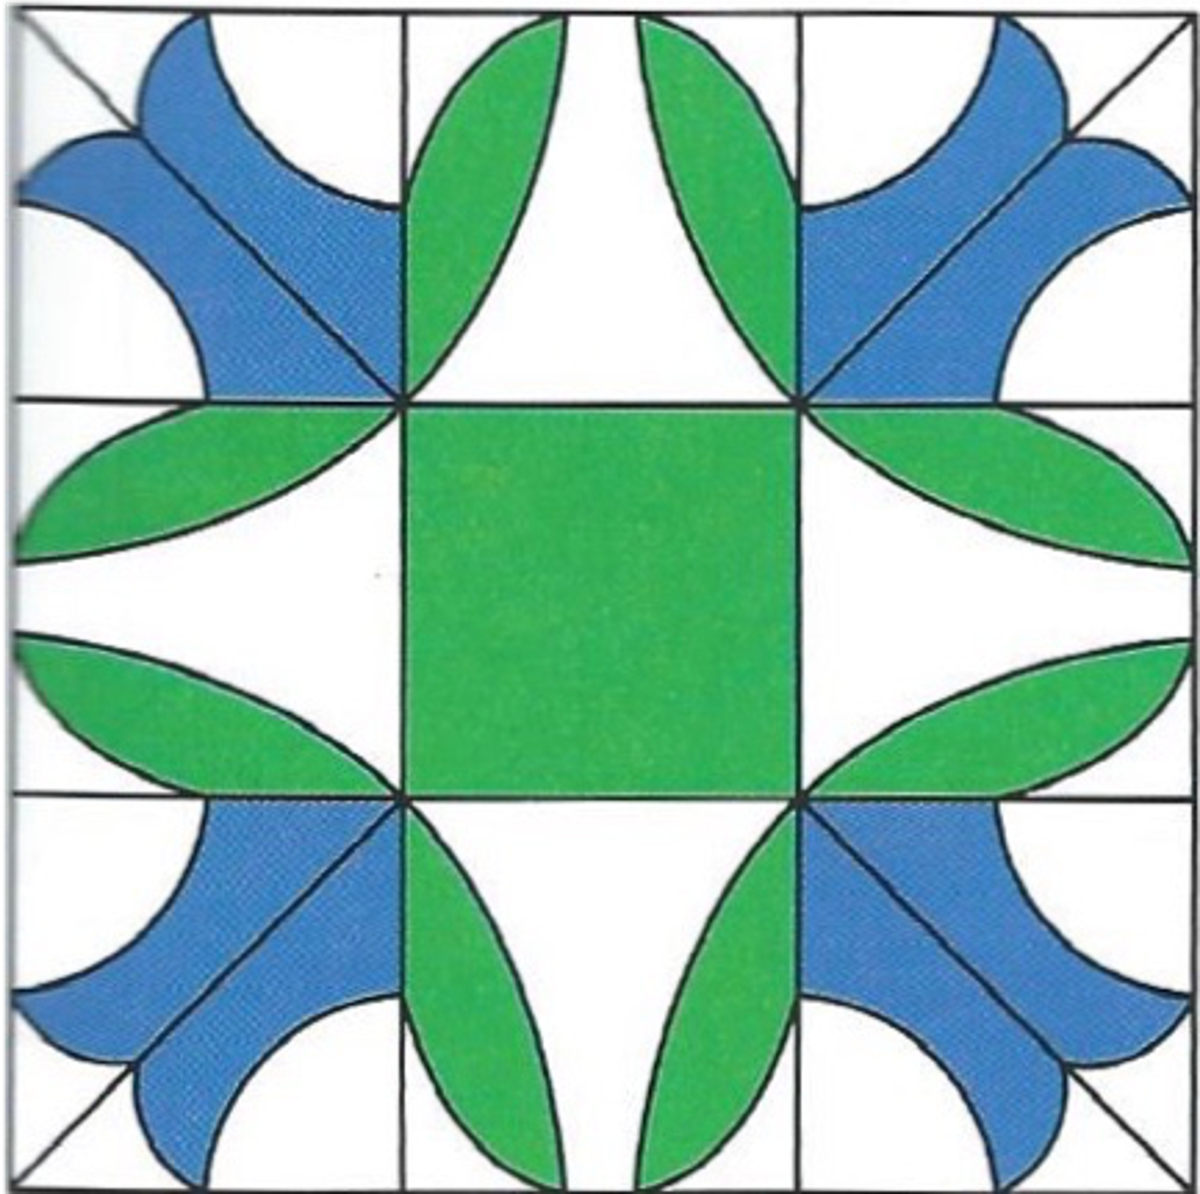 A Bluebells quilt square